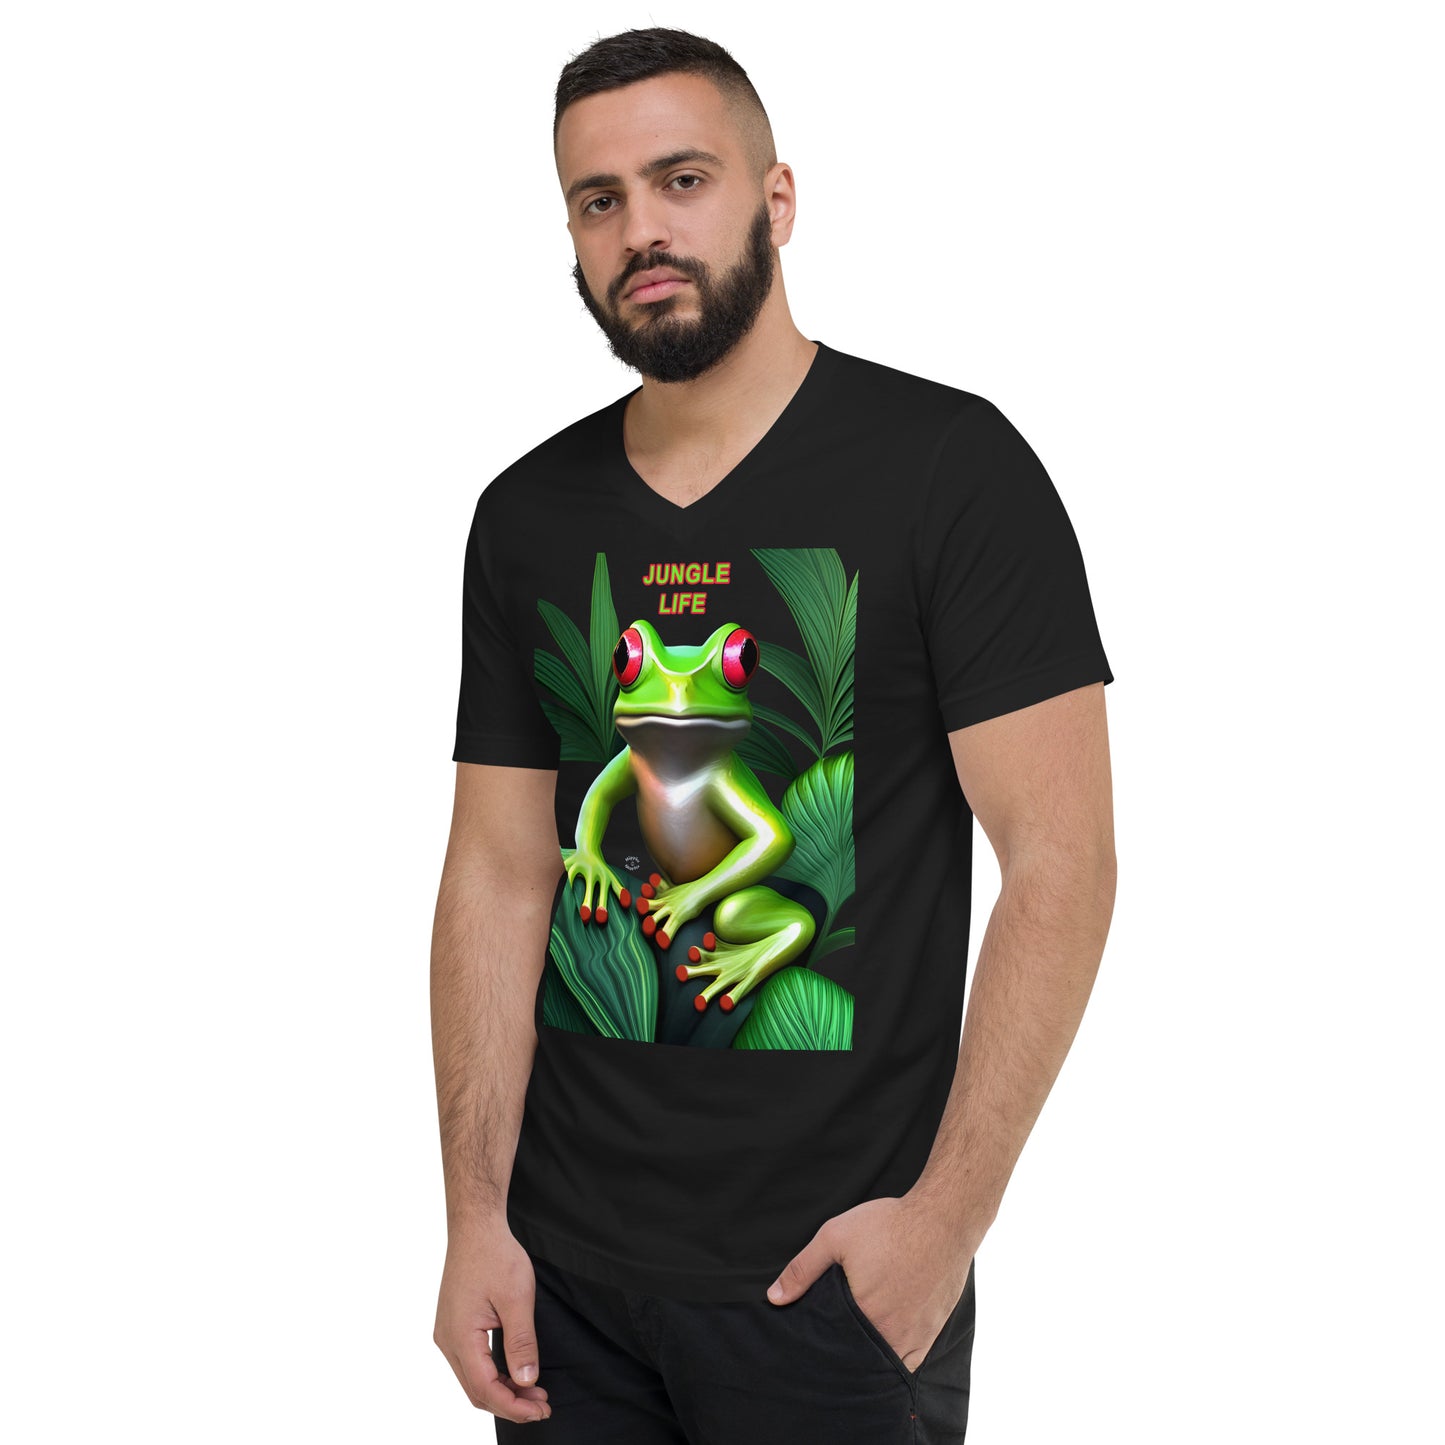 A picture of a man wearing a tshirt with a green frog poking through some leaves and the text JUNGLE LIFE - black left front